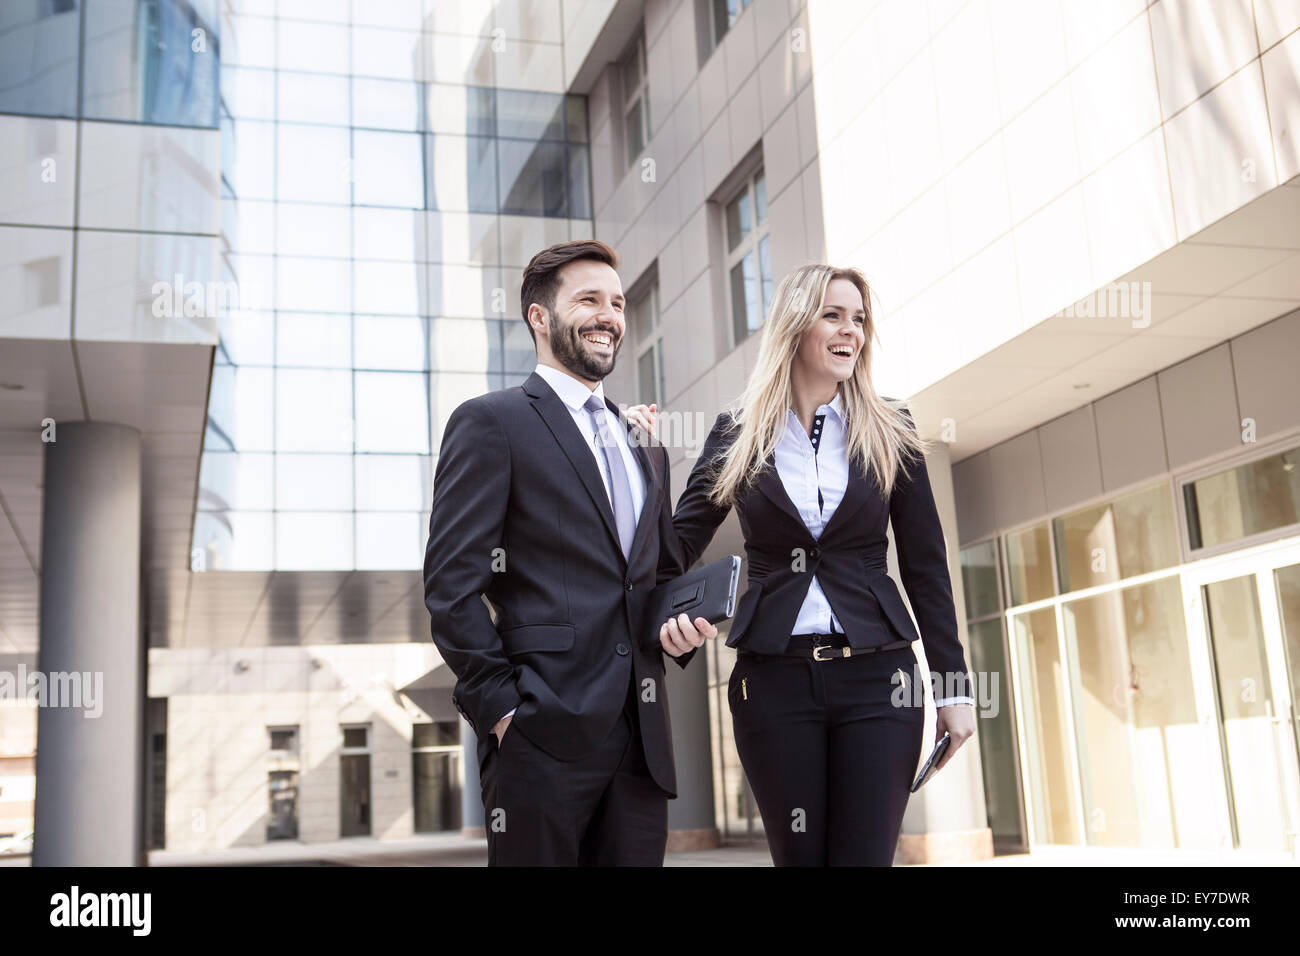 Business partners laughing Stock Photo